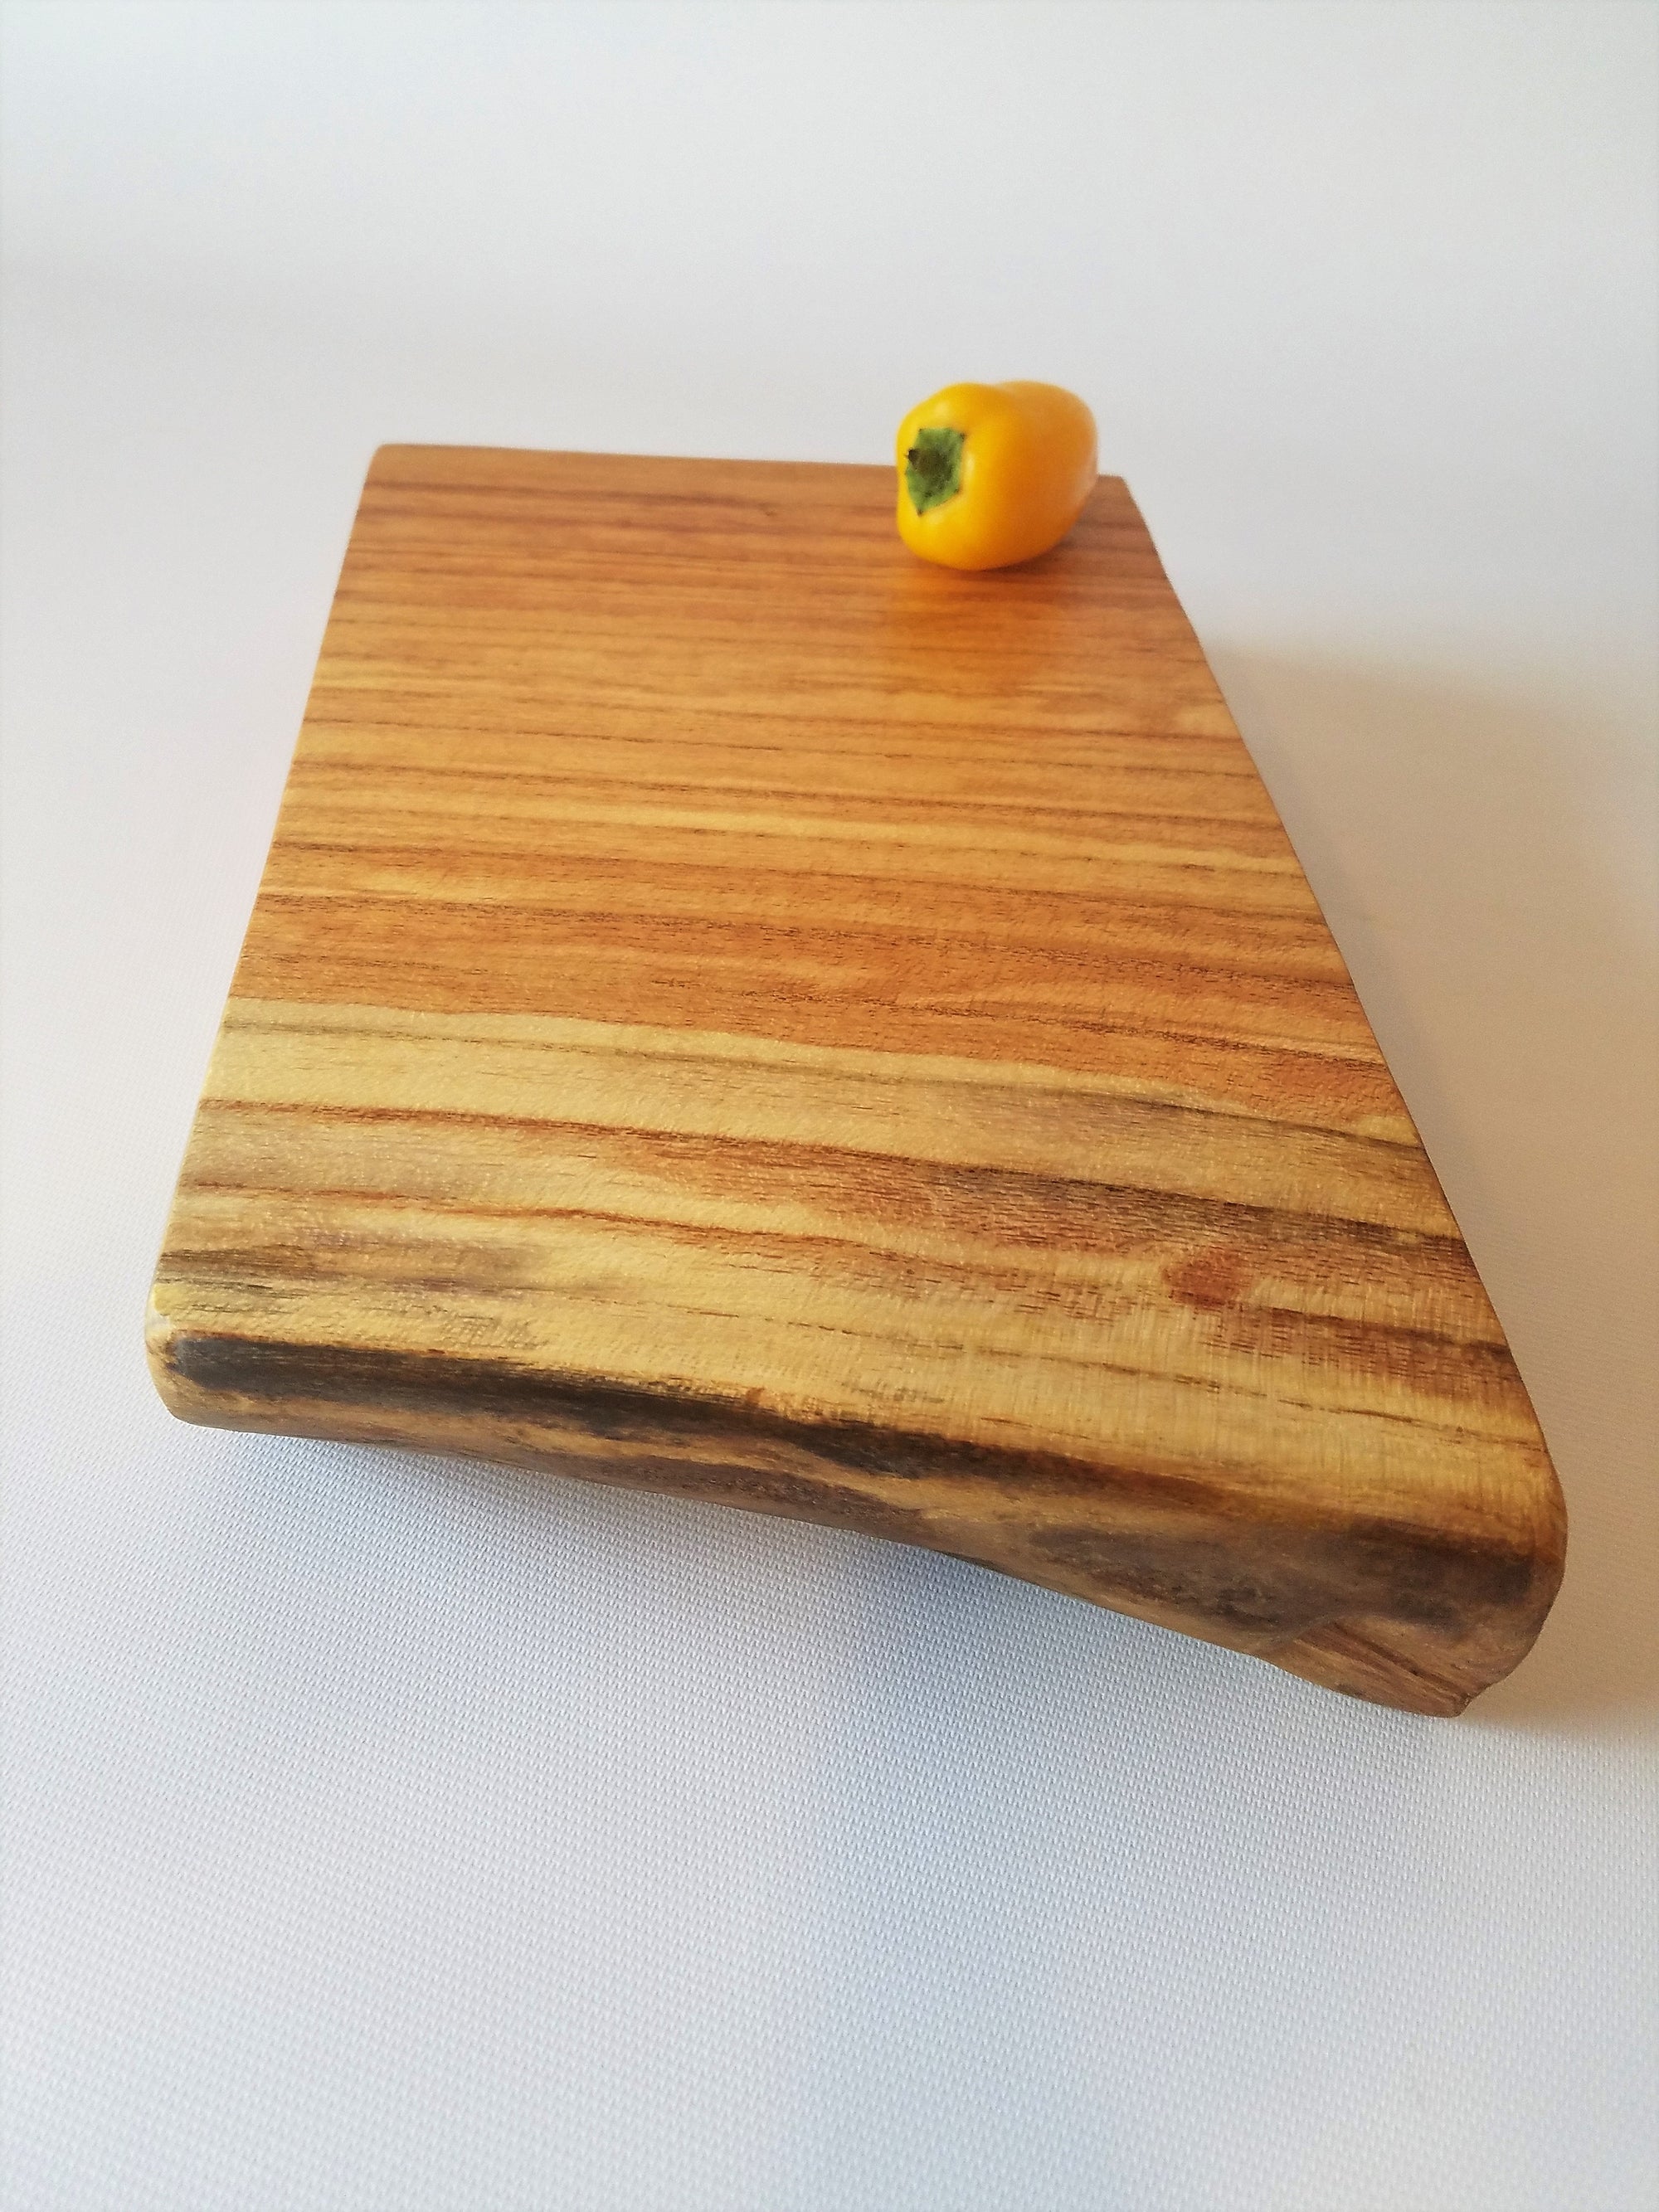 Chopping board and serving tray, Thick and hard Walnut wood.Kitchen decor.  Round